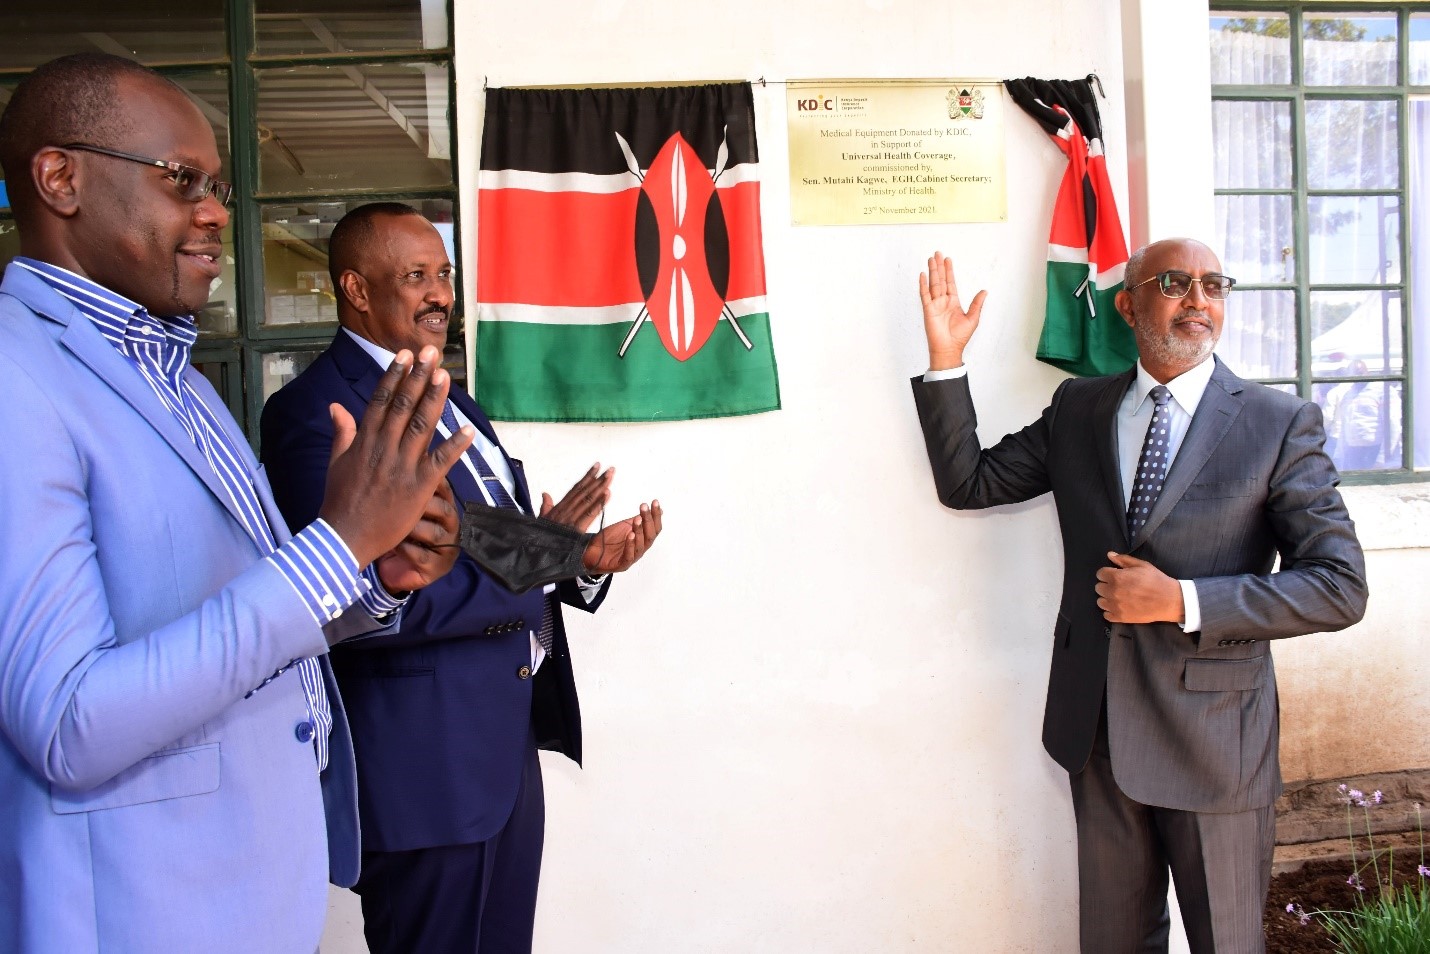 Right to Left: Dr. R.Aman, CEO Mohamud and Dr. Otieno during the unveiling of the KDIC plaque 